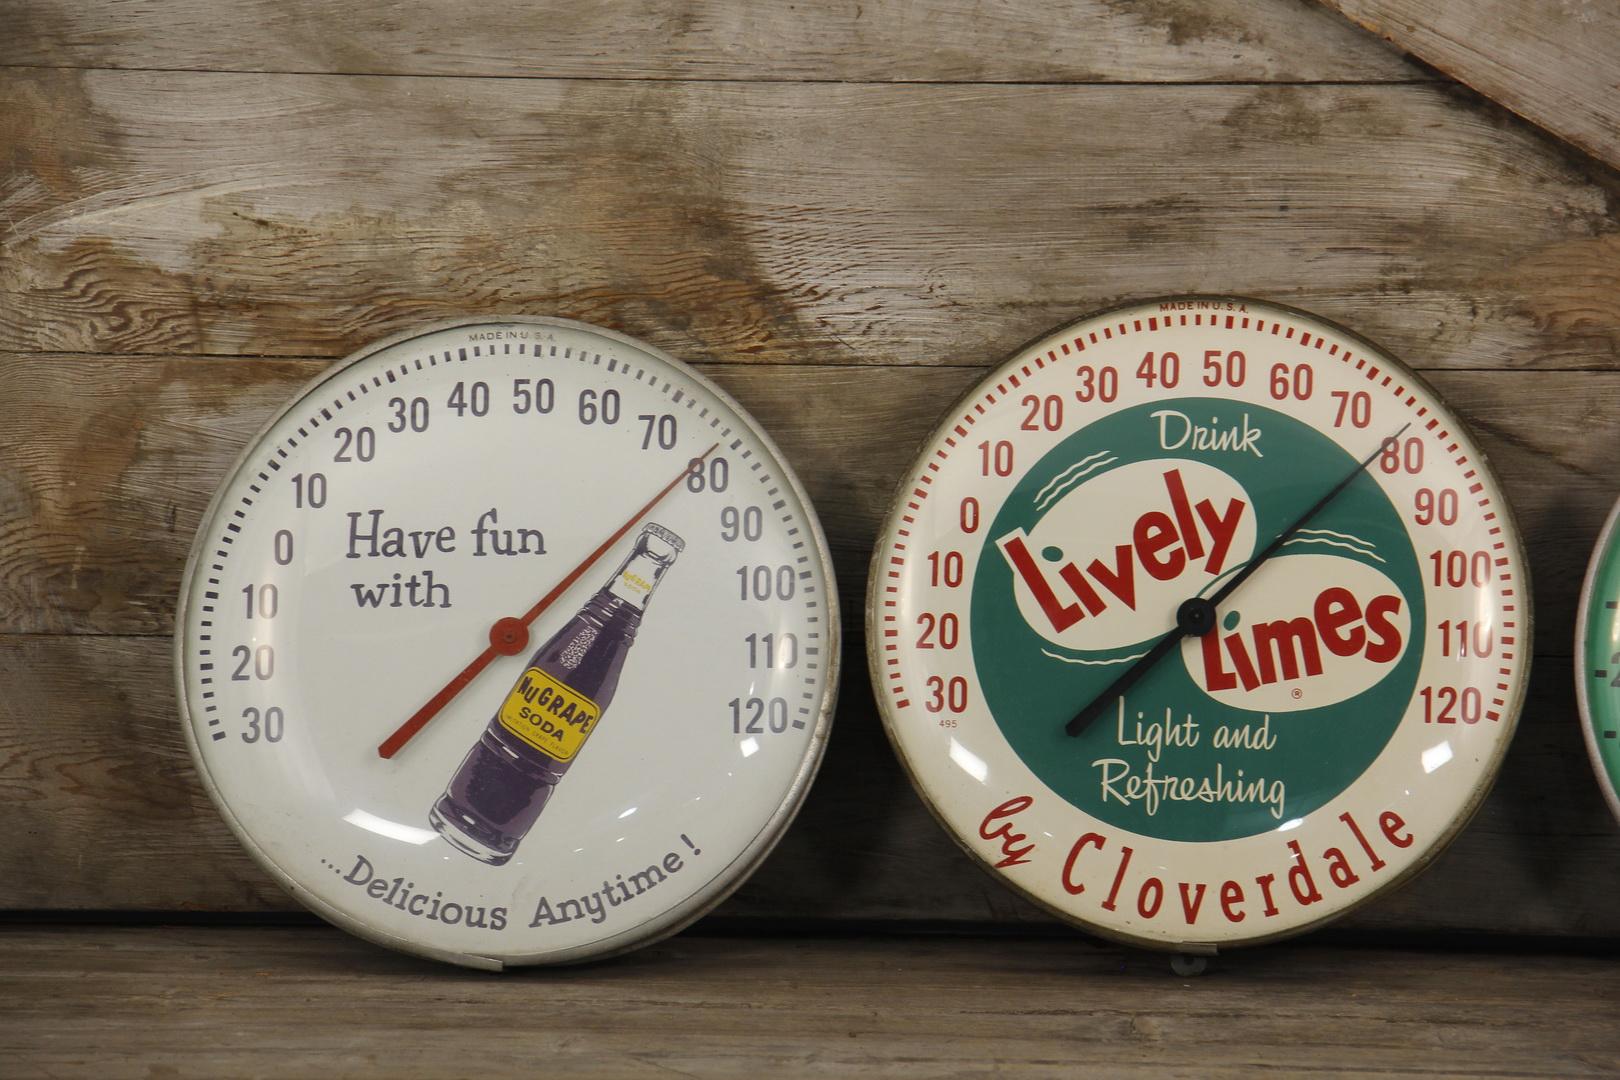 Lot of 3 NuGrape Lively Limes and Sundrop Thermometers